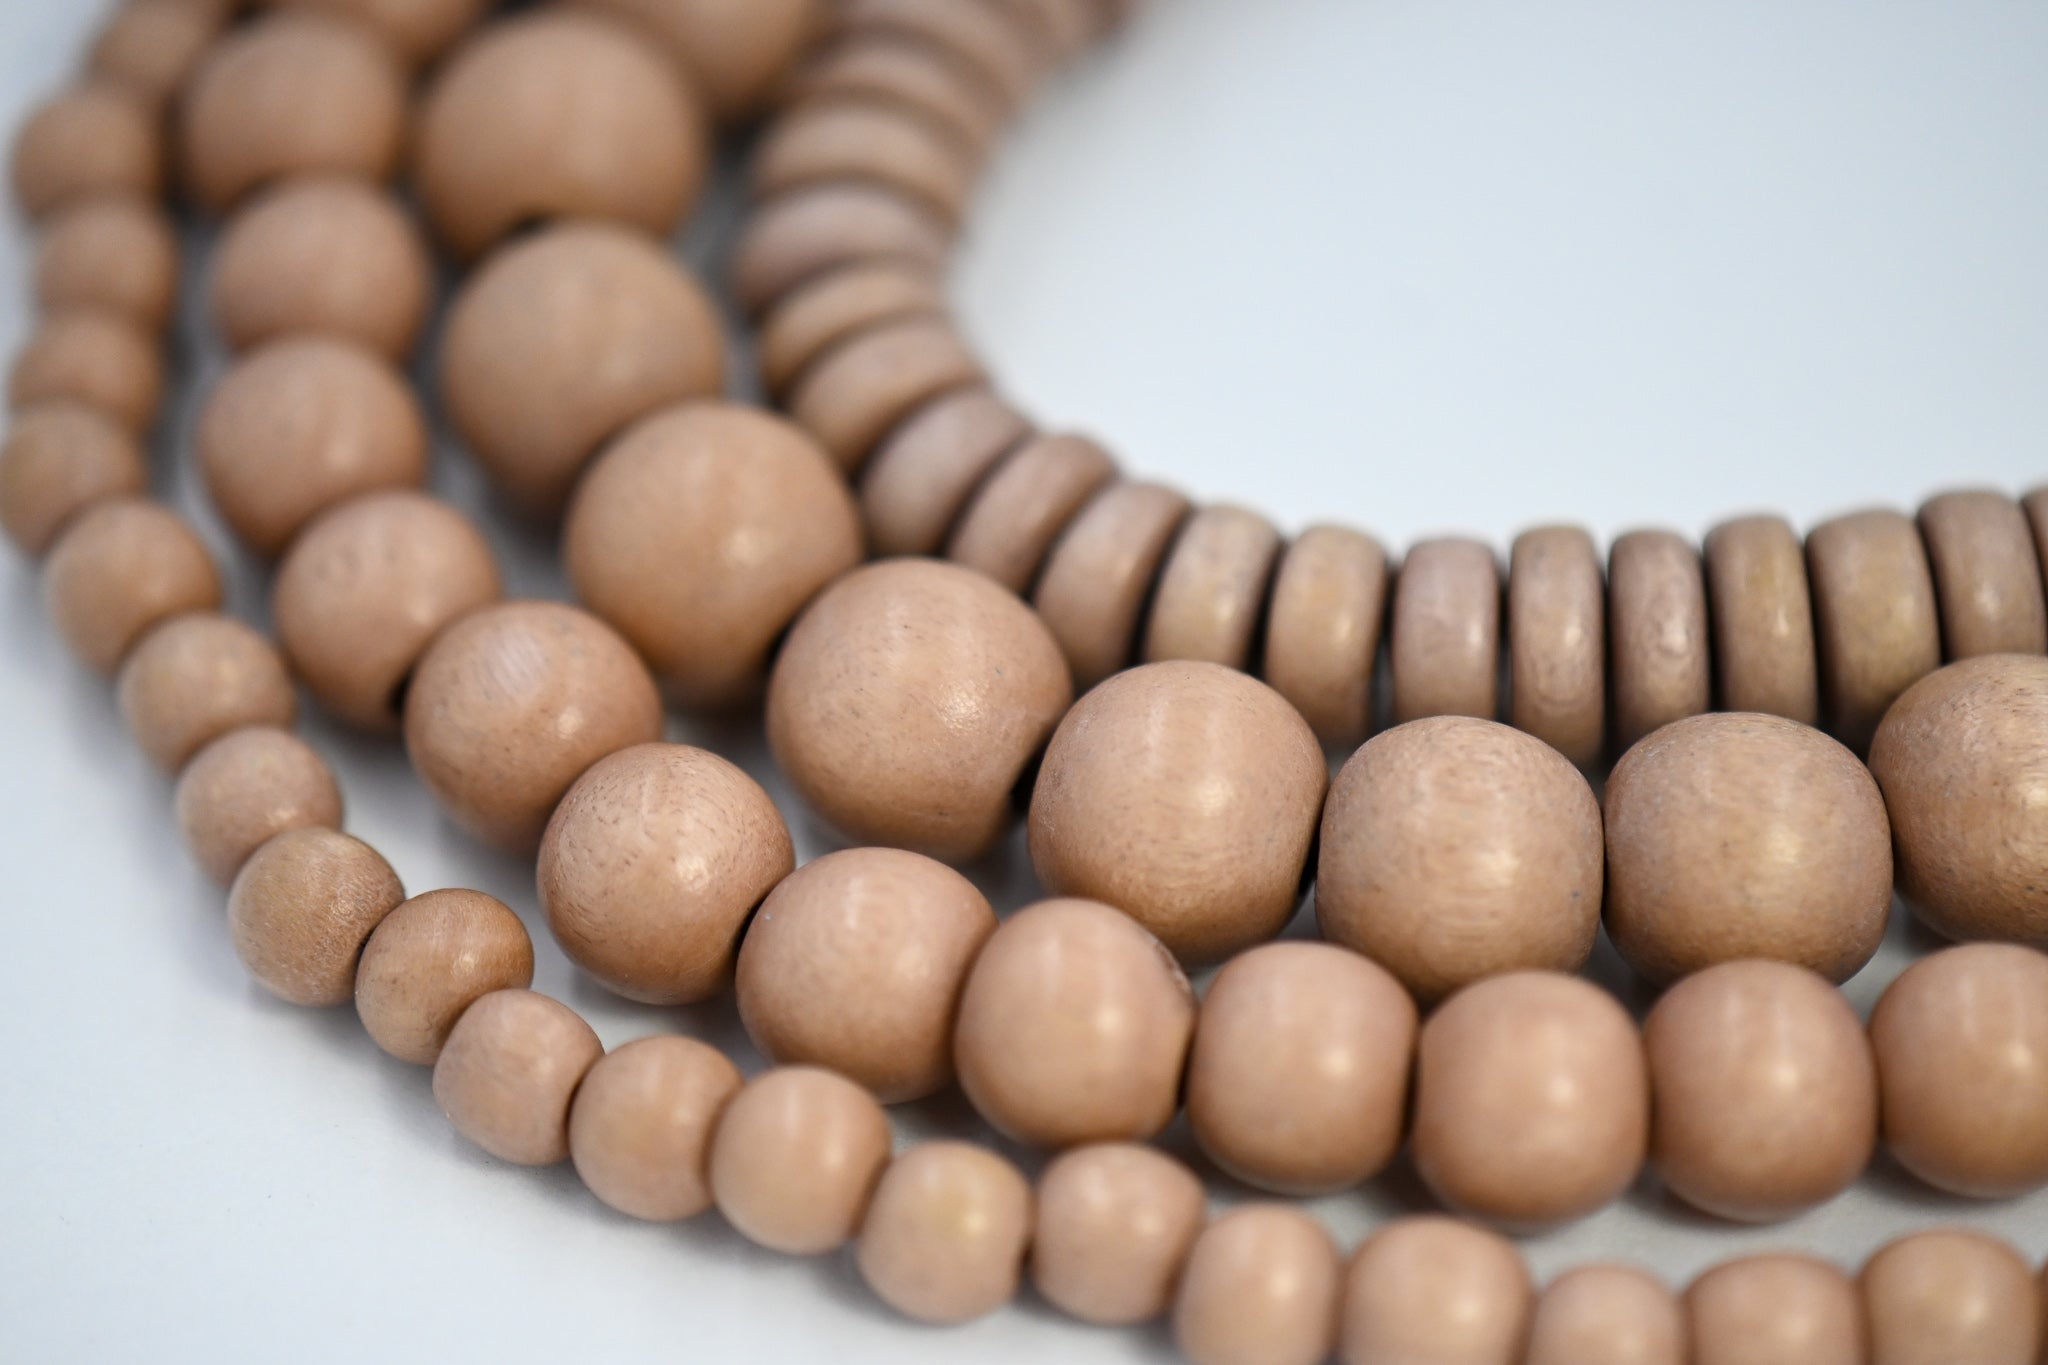 wood Beads  Fawn Brown Colored Rondelle Wood Beads for Jewelry Making